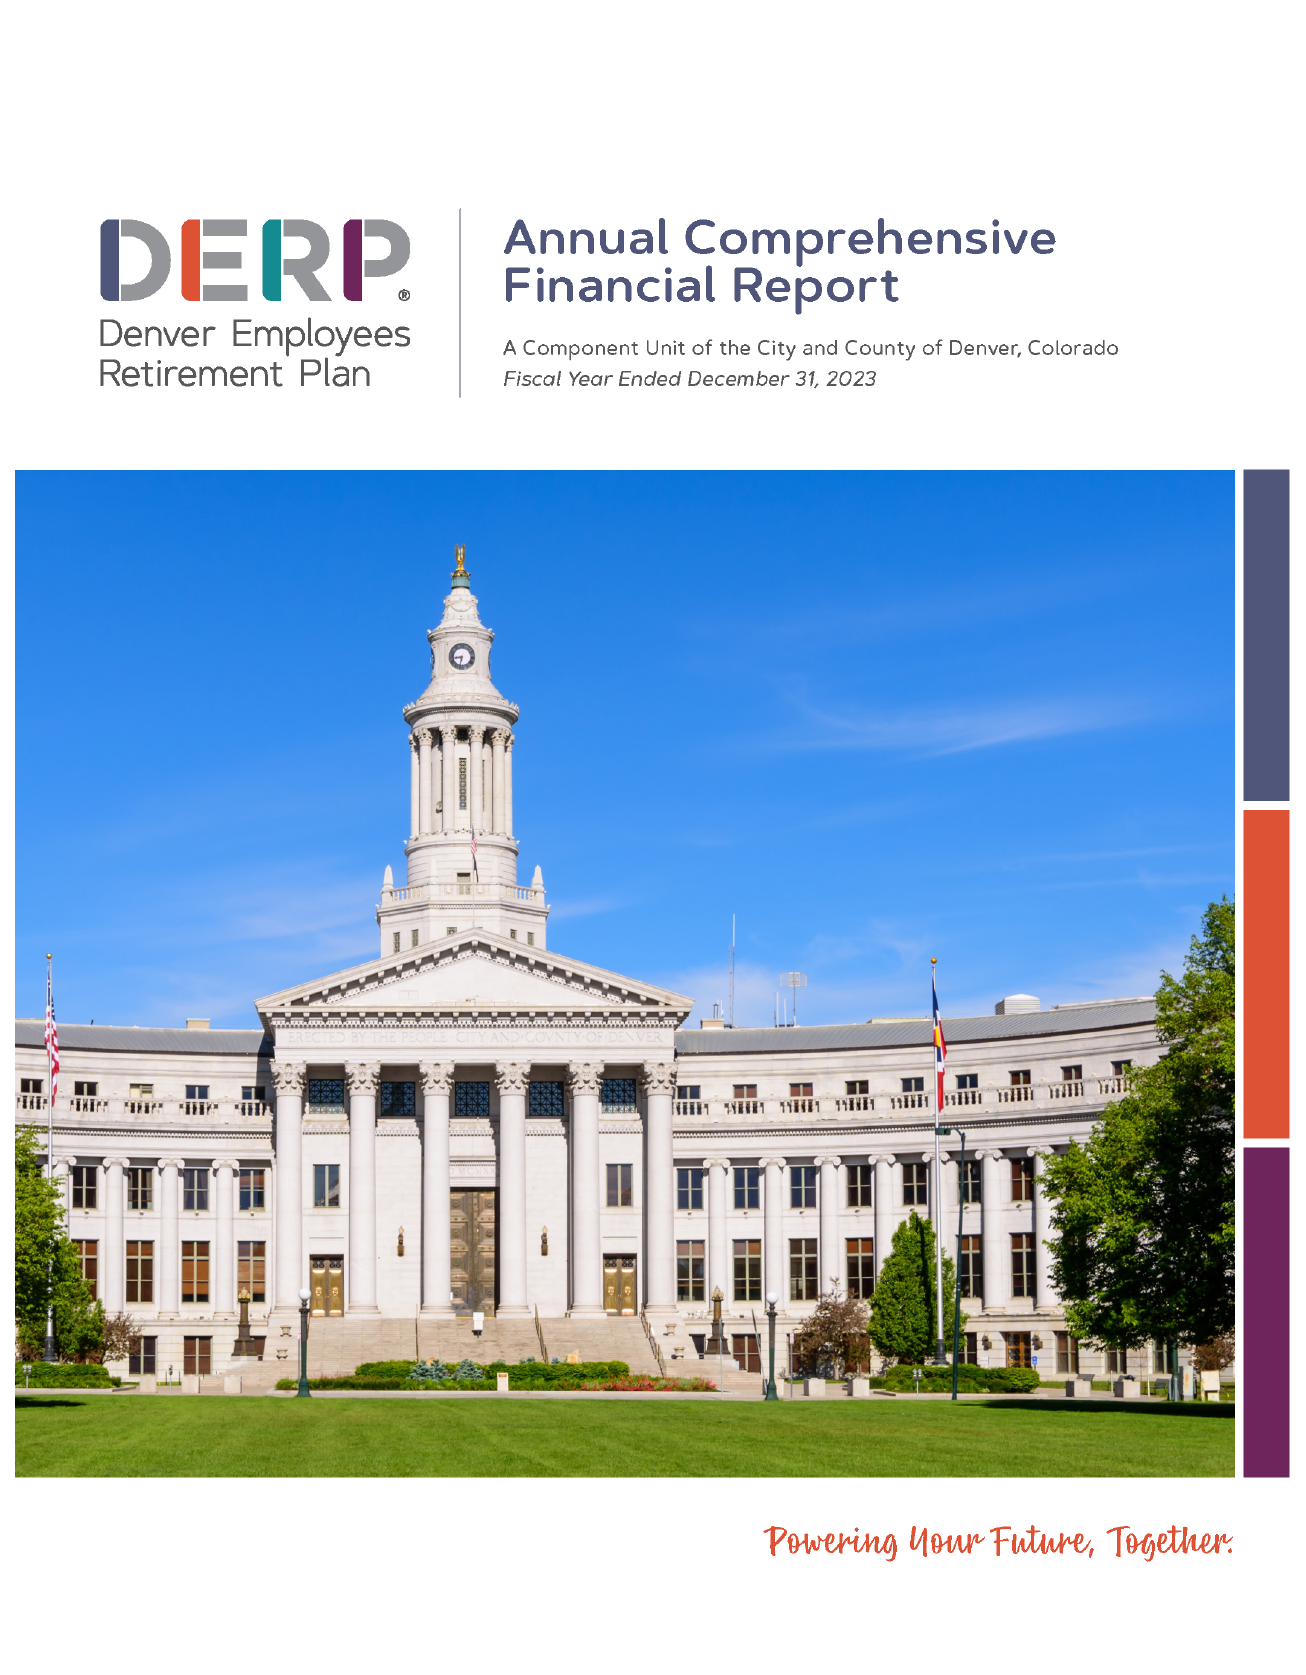 The cover to the DERP 2023 Annual Comprehensive Financial report show the City and County of Denver building on a sunny spring day. The DERP logo colors are on the right, and the tagline "Powering Futures Together" is at the bottom.